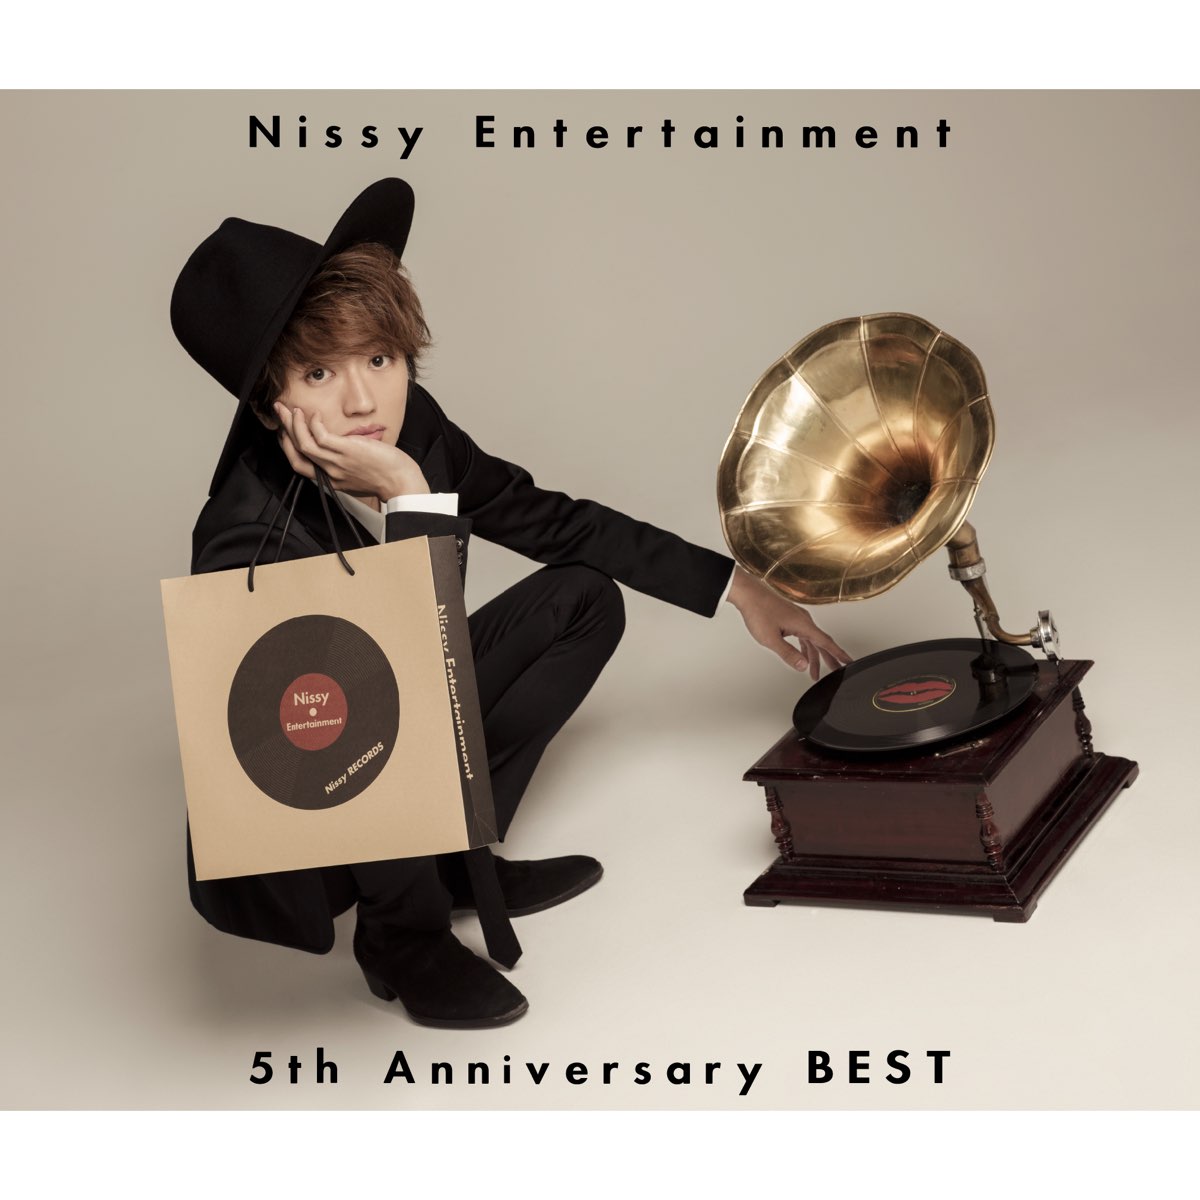 Nissy Entertainment 5th Anniversary BEST by Nissy on Apple Music